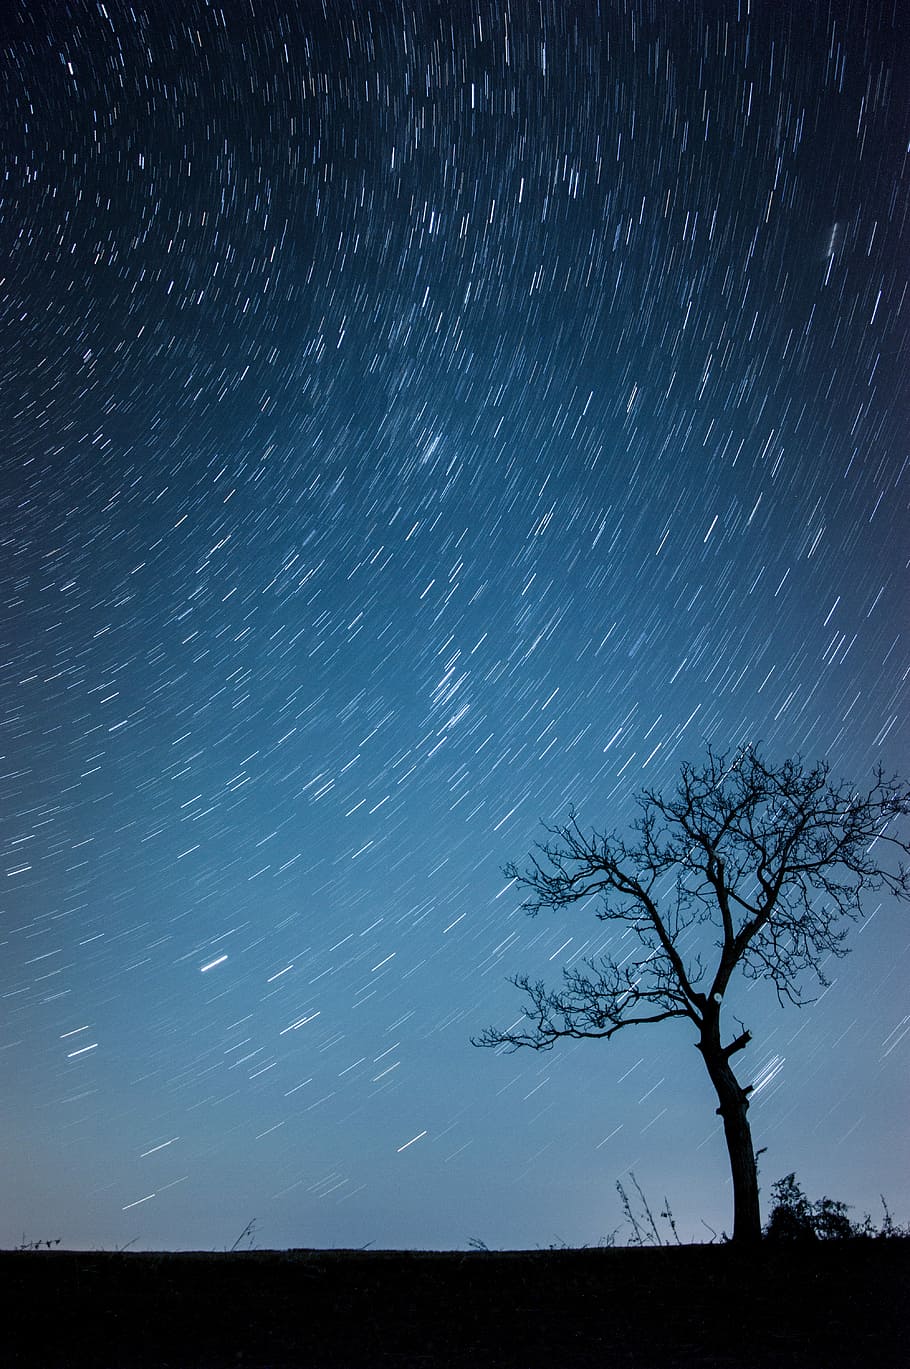 HD wallpaper: silhouette of tree, time lapse photo of tree silhouette under  starry sky during nightime | Wallpaper Flare